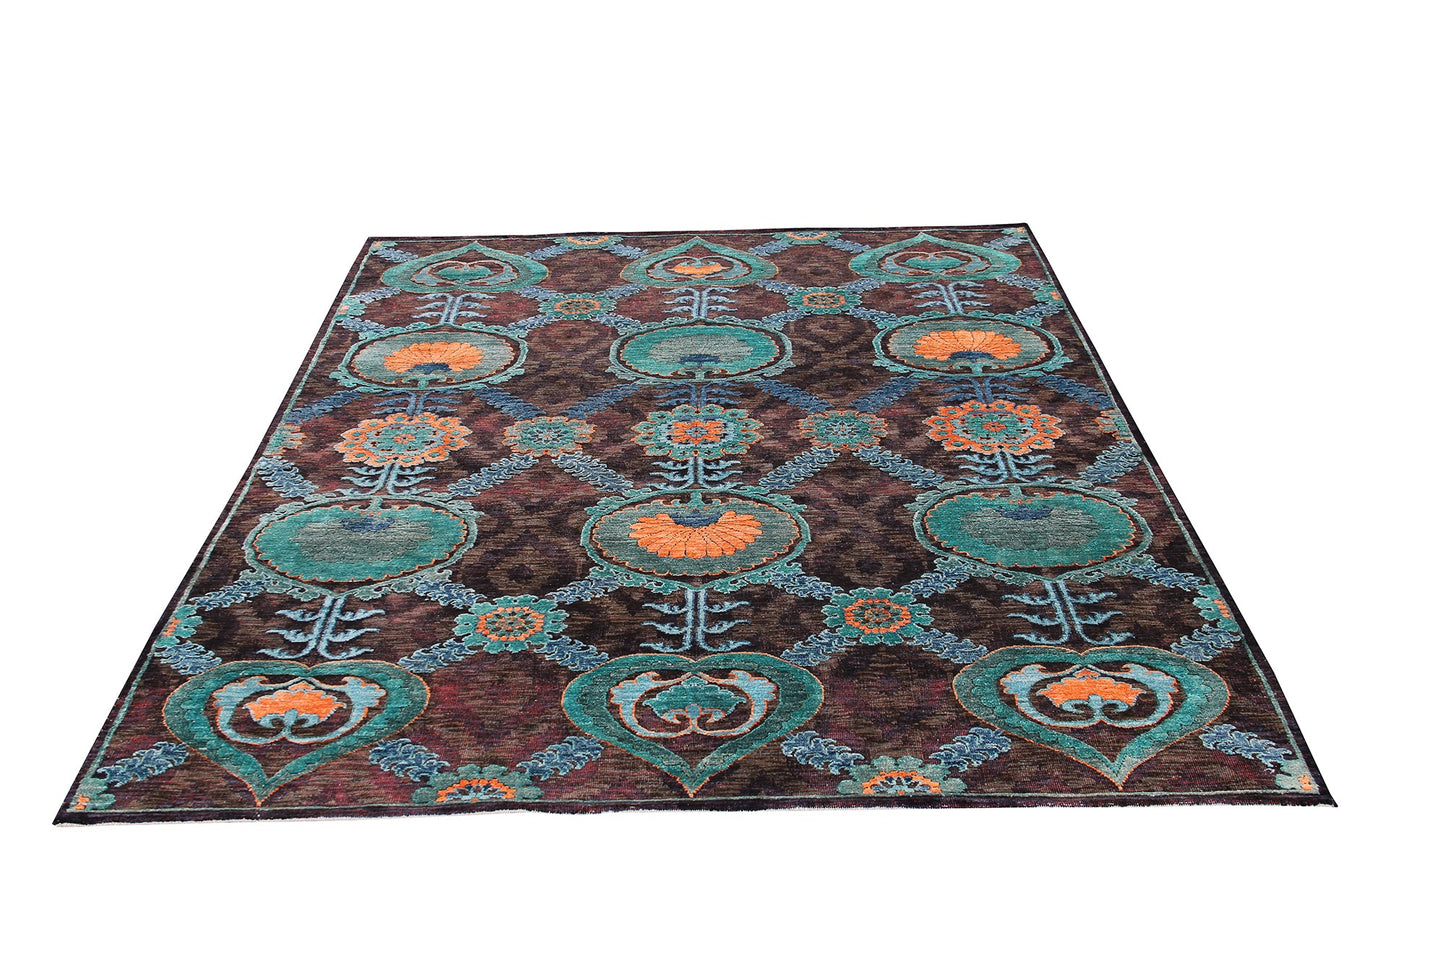 Indian Modern Fine Hand-Knotted Wool & Silk Area Rug product image #27555391930538